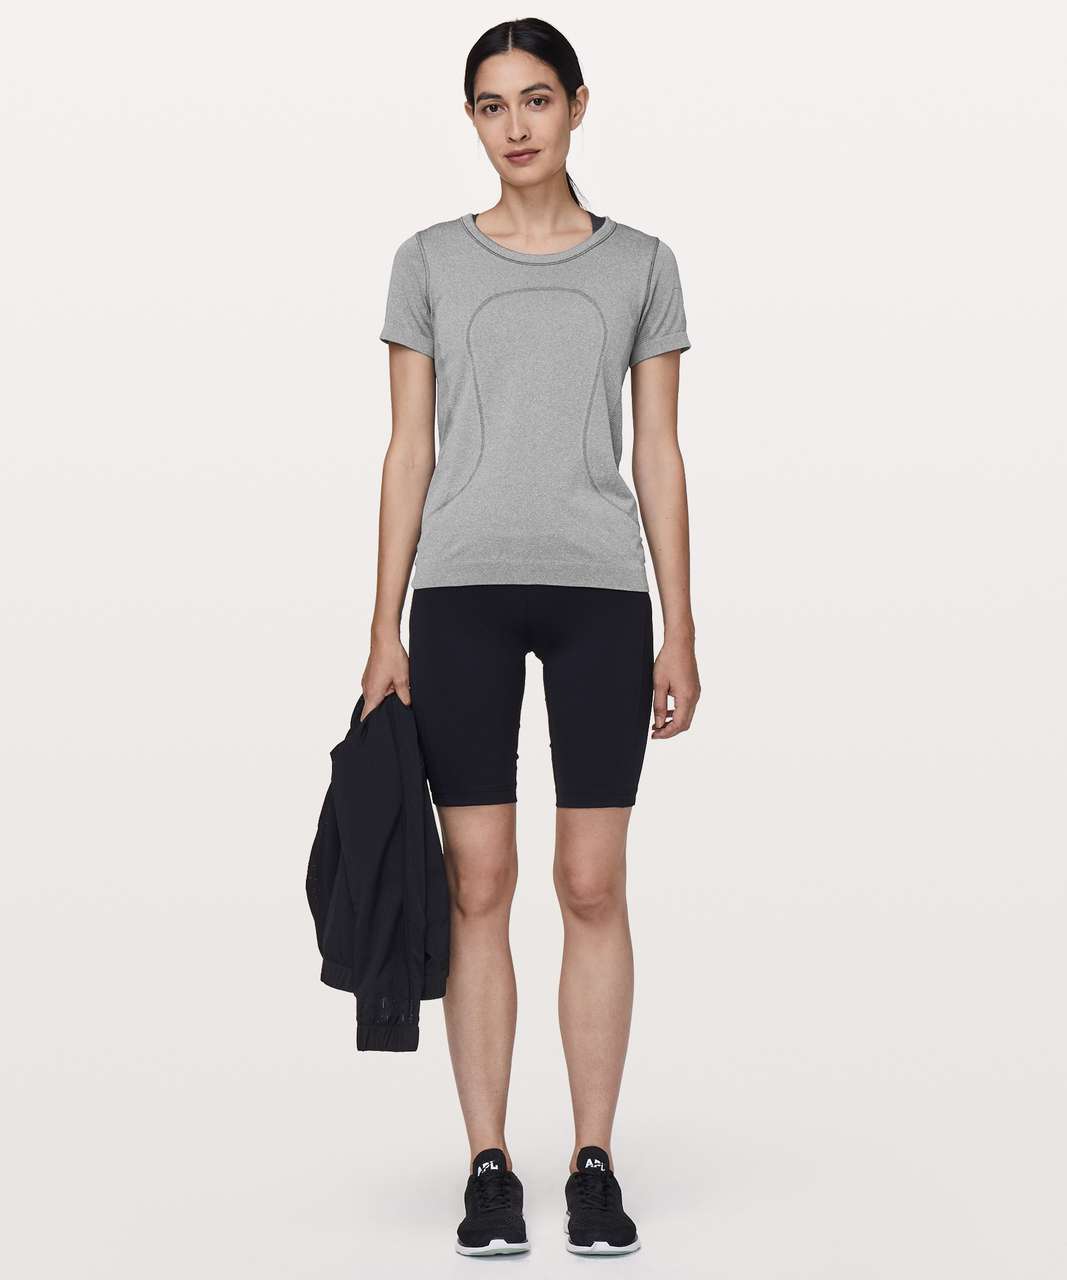 Lululemon Swiftly Tech Short Sleeve (Breeze) *Relaxed Fit - Slate / White (First Release)